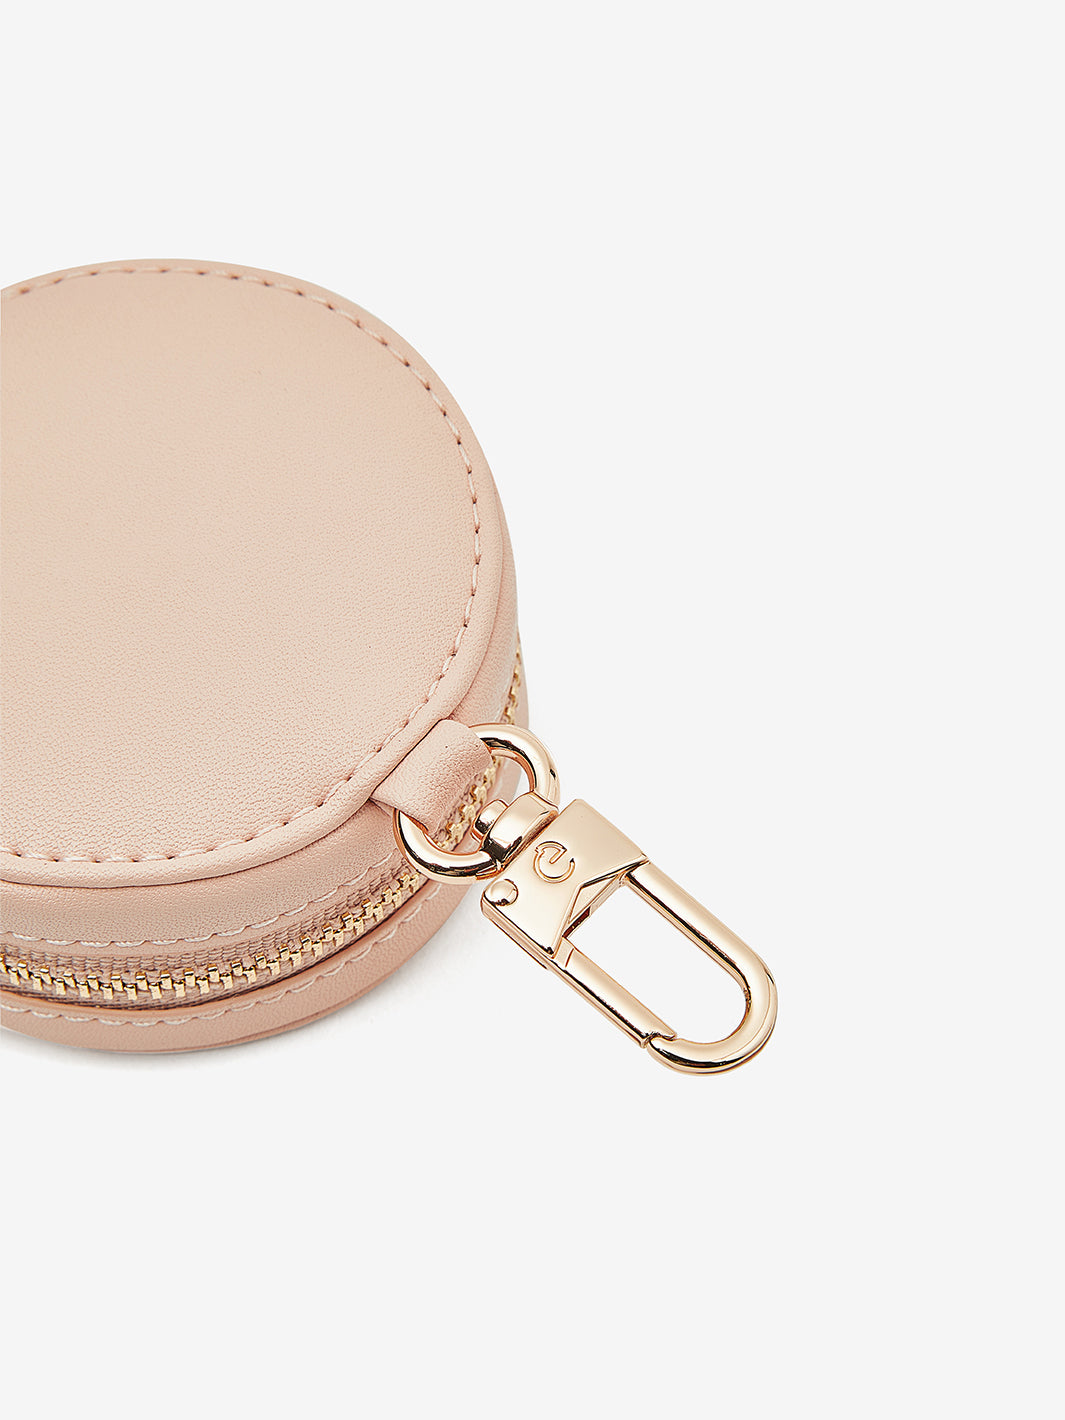 Custype Small round bag pink-2